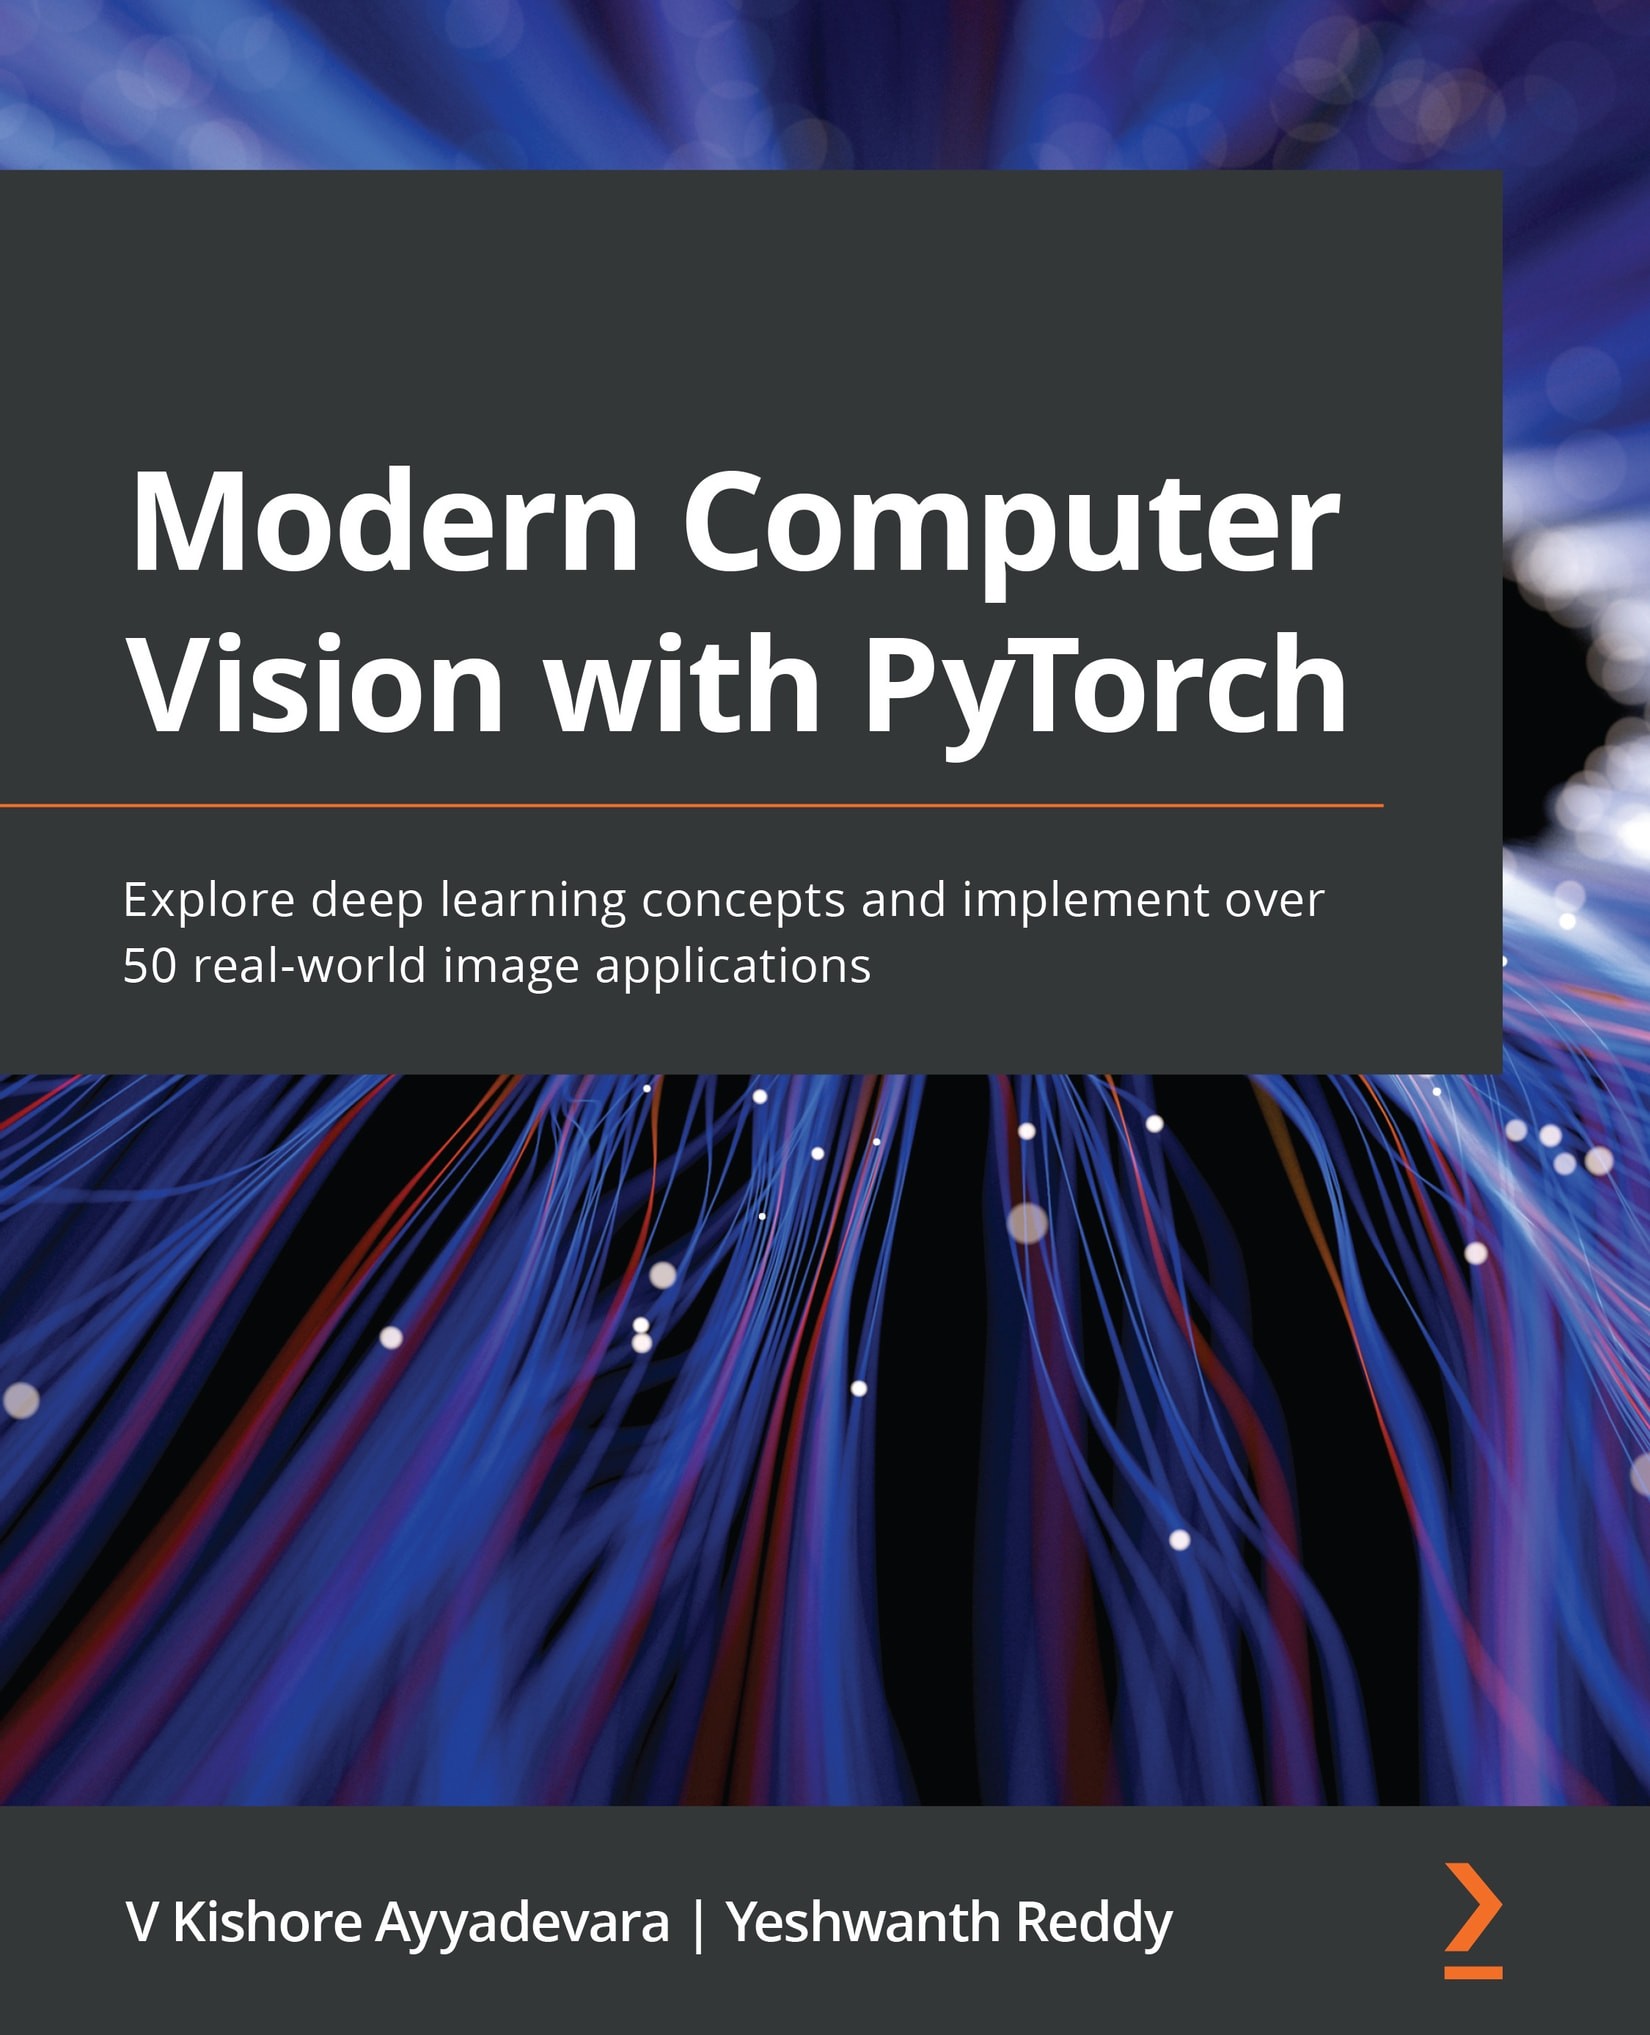 Hands-On Computer Vision with Pytorch: Implement Deep Learning to Build Real-World Computer... Vision Applications Using Python